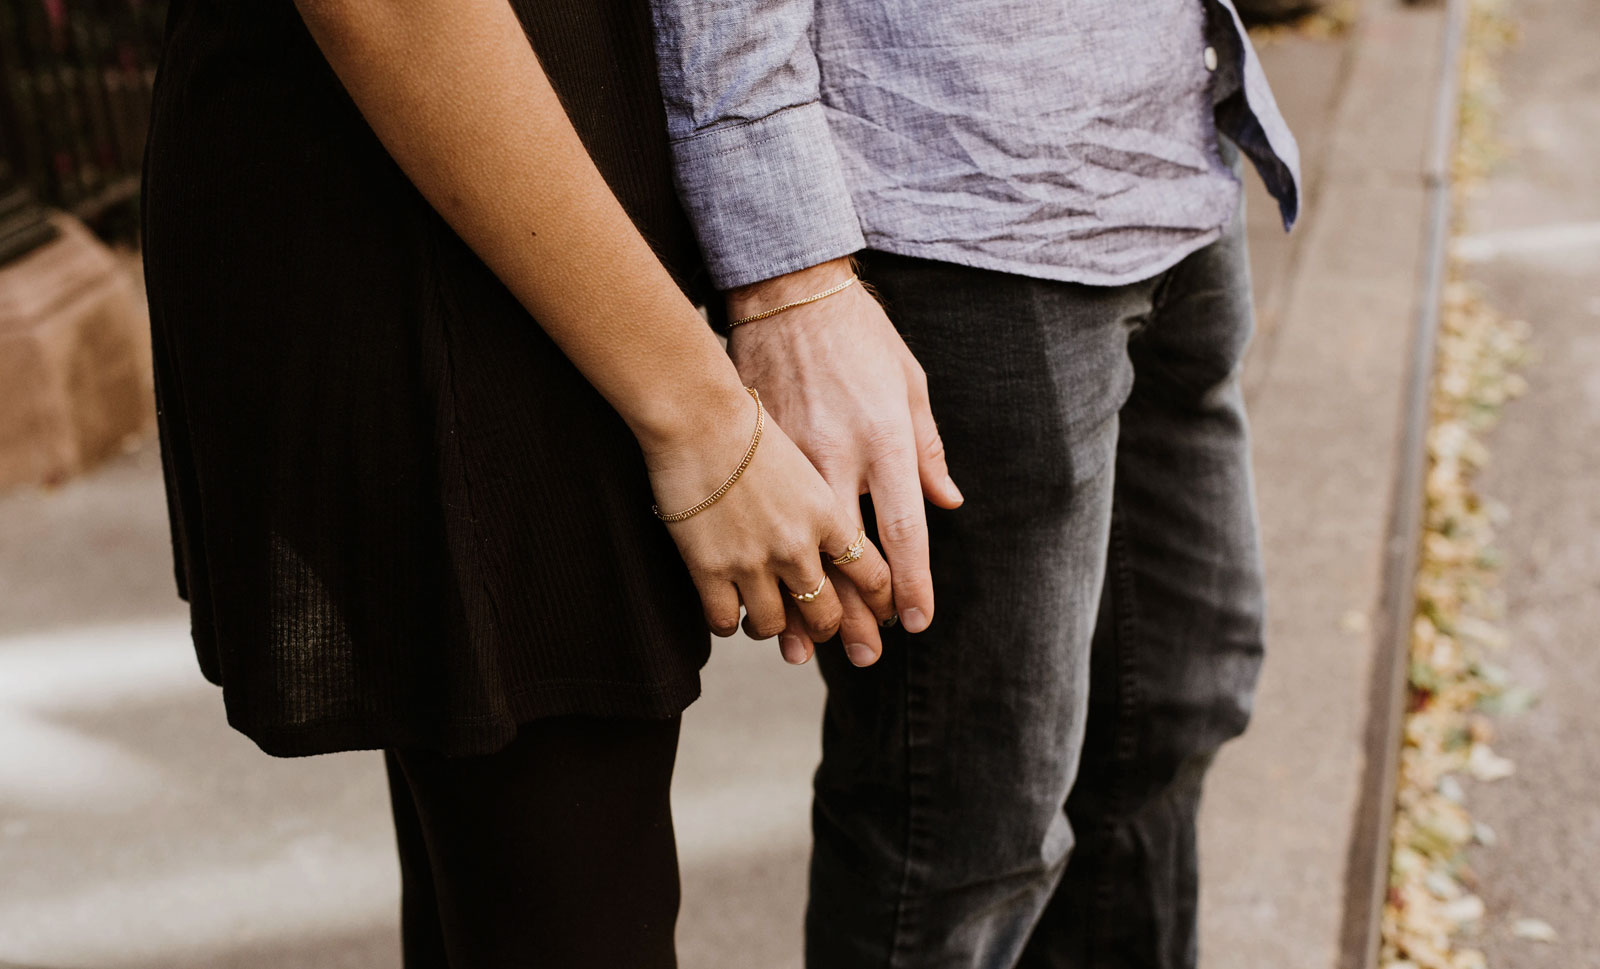 A woman about to hold the hand of a man